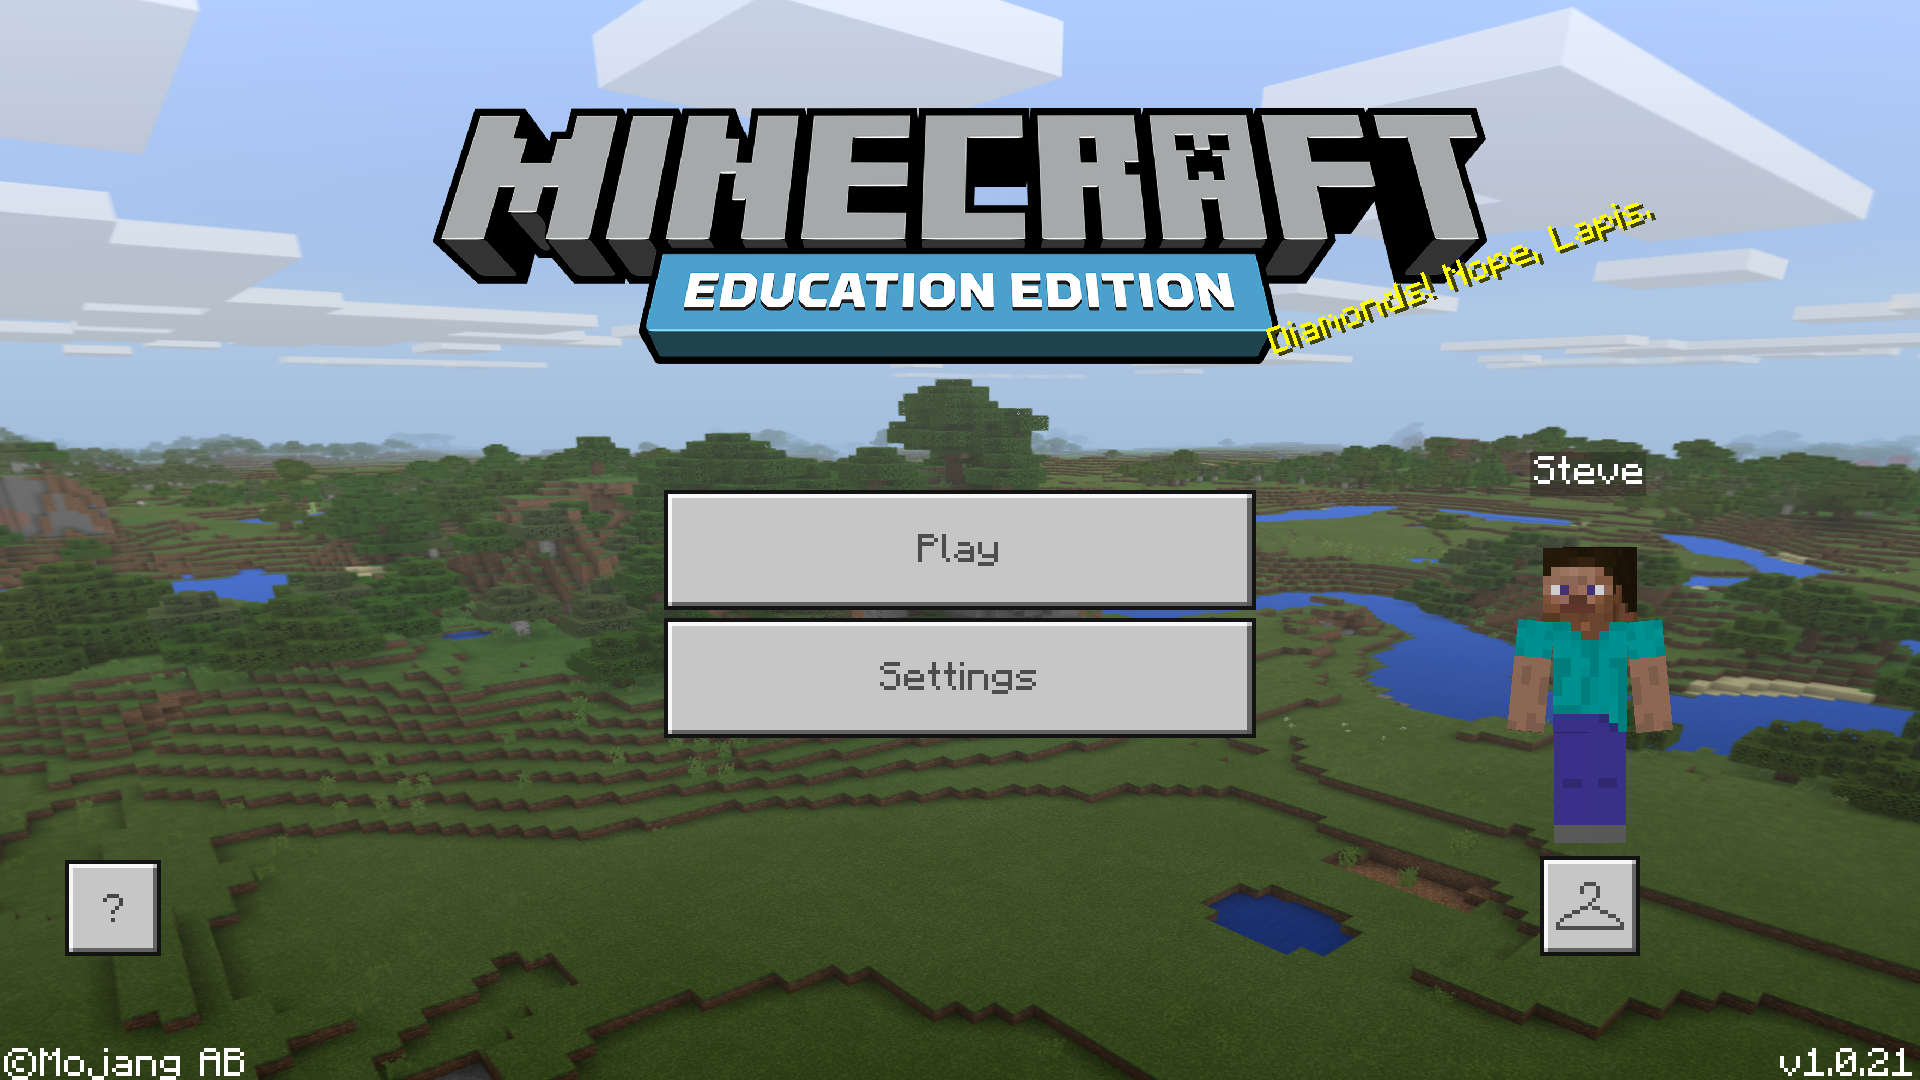 When will Minecraft: Education Edition get the latest Bedrock